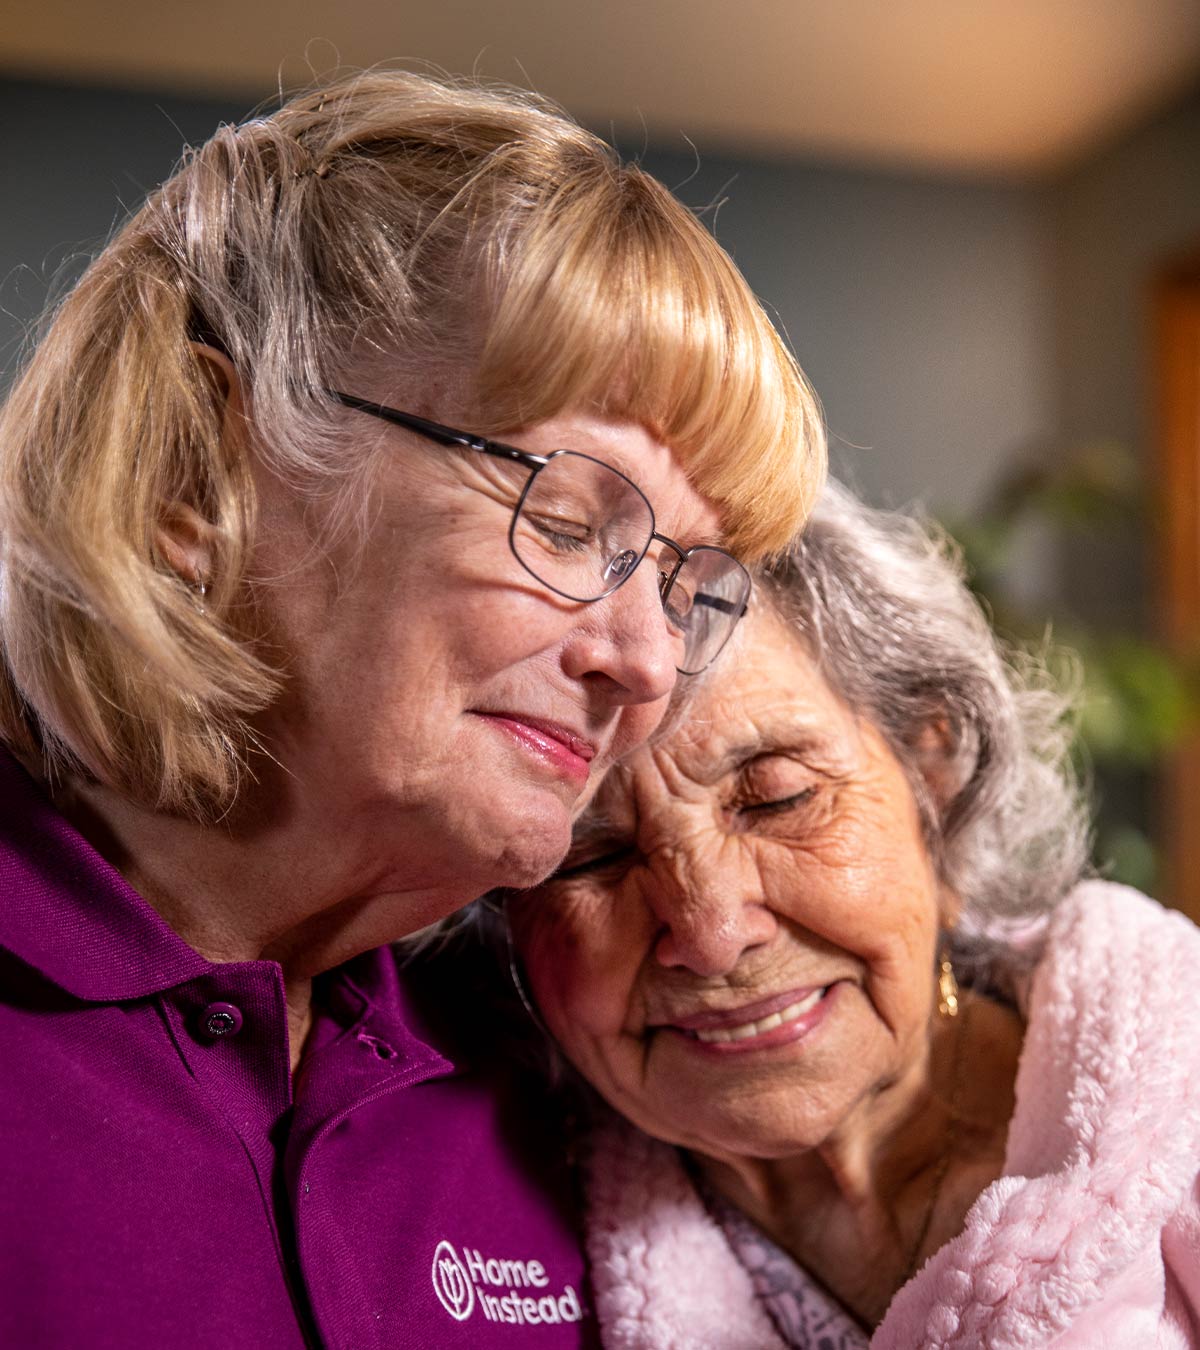 CAREGiver providing in-home senior care services. Home Instead of Eau Claire, WI provides Elder Care to aging adults. 